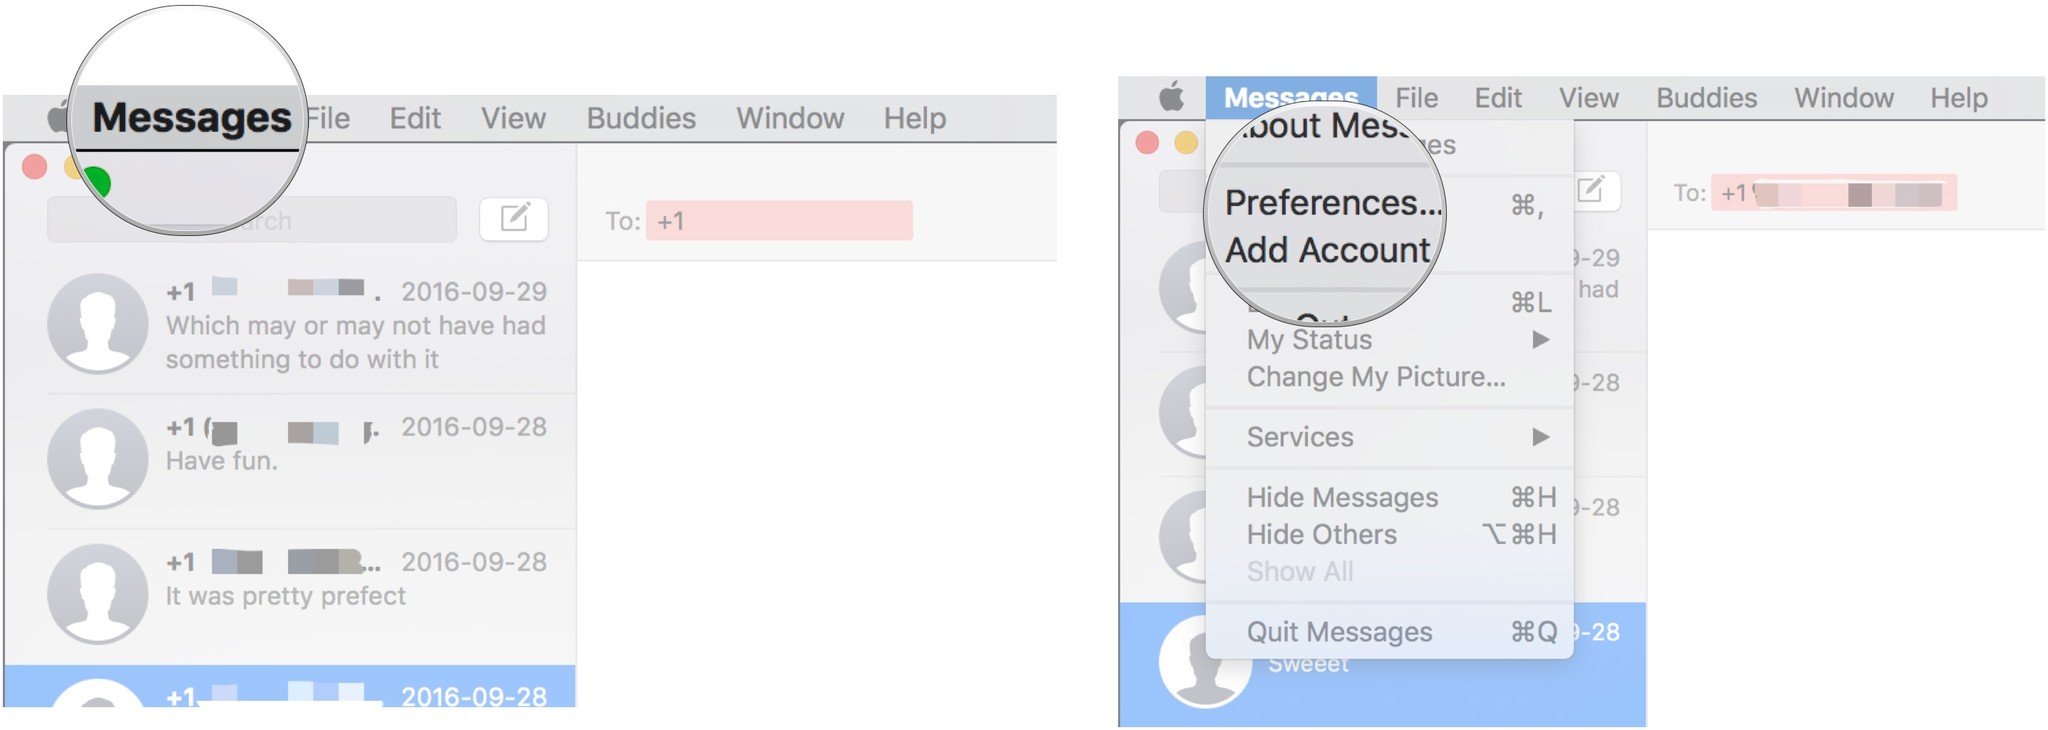 To sign out of iMessage, launch the Messages app, then click Messages from the menu bar. Choose Preferences next. 